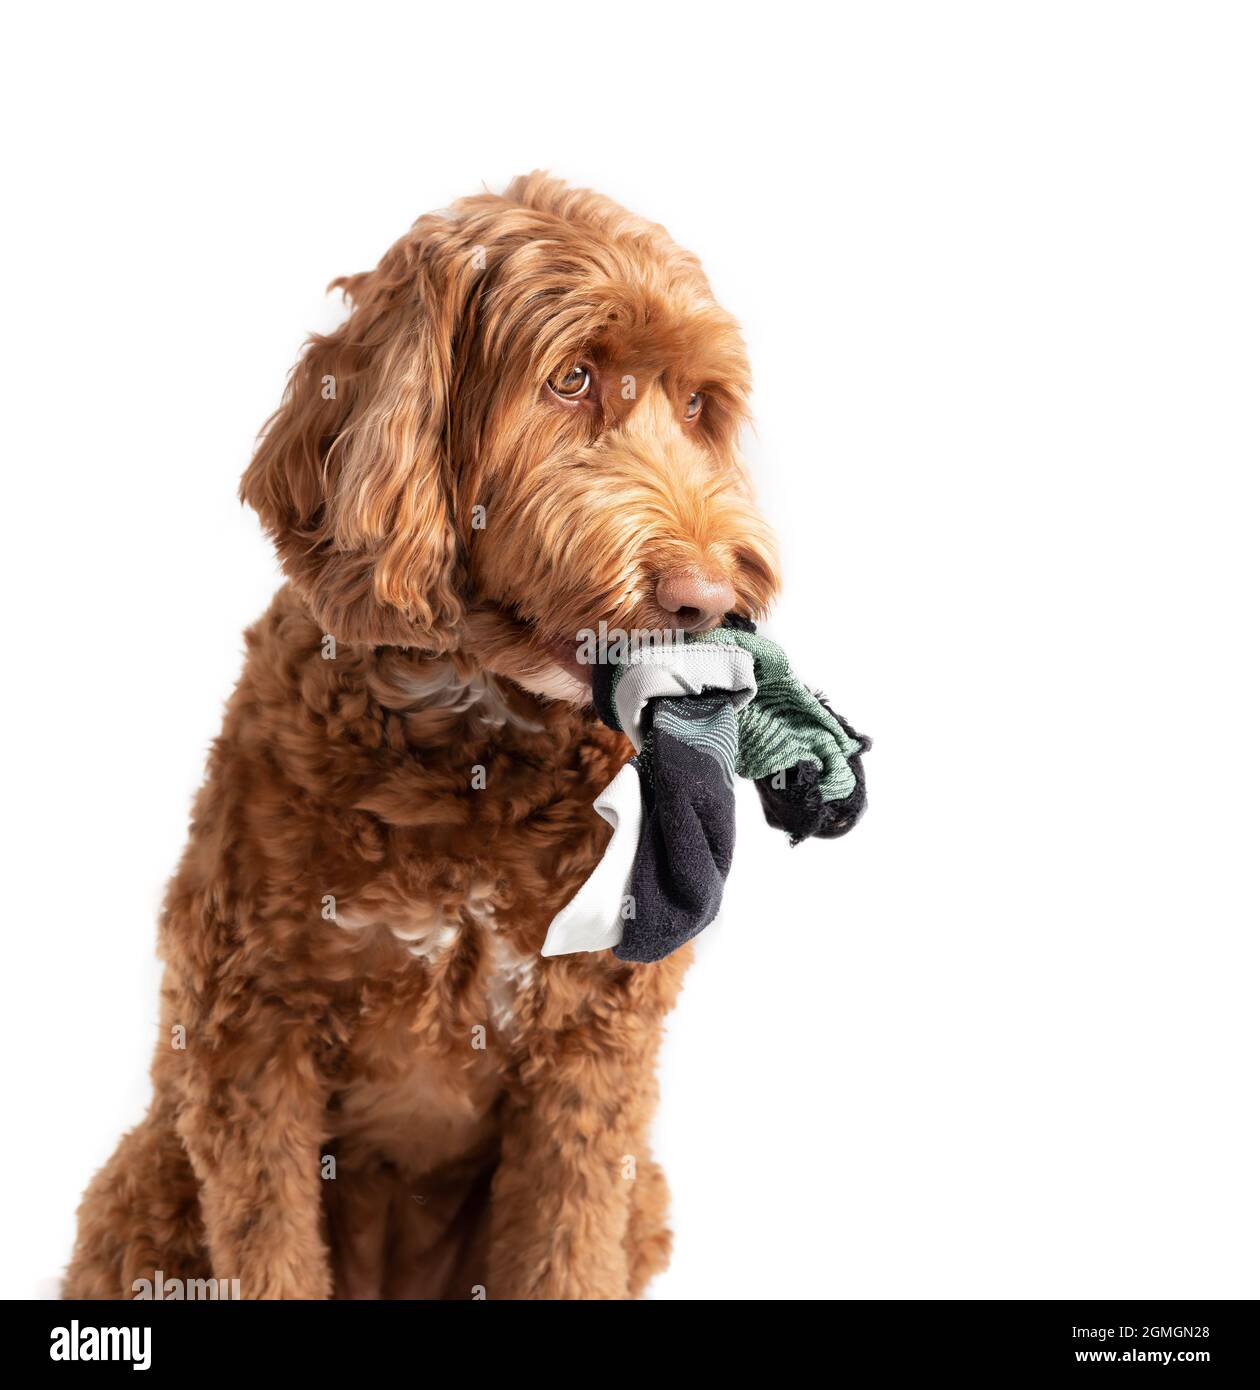 Labradoodle dog with socks hanging out of the mouth. Side profile of cute innocent looking female dog. Concept for why dogs eat, chew or steal socks. Stock Photo